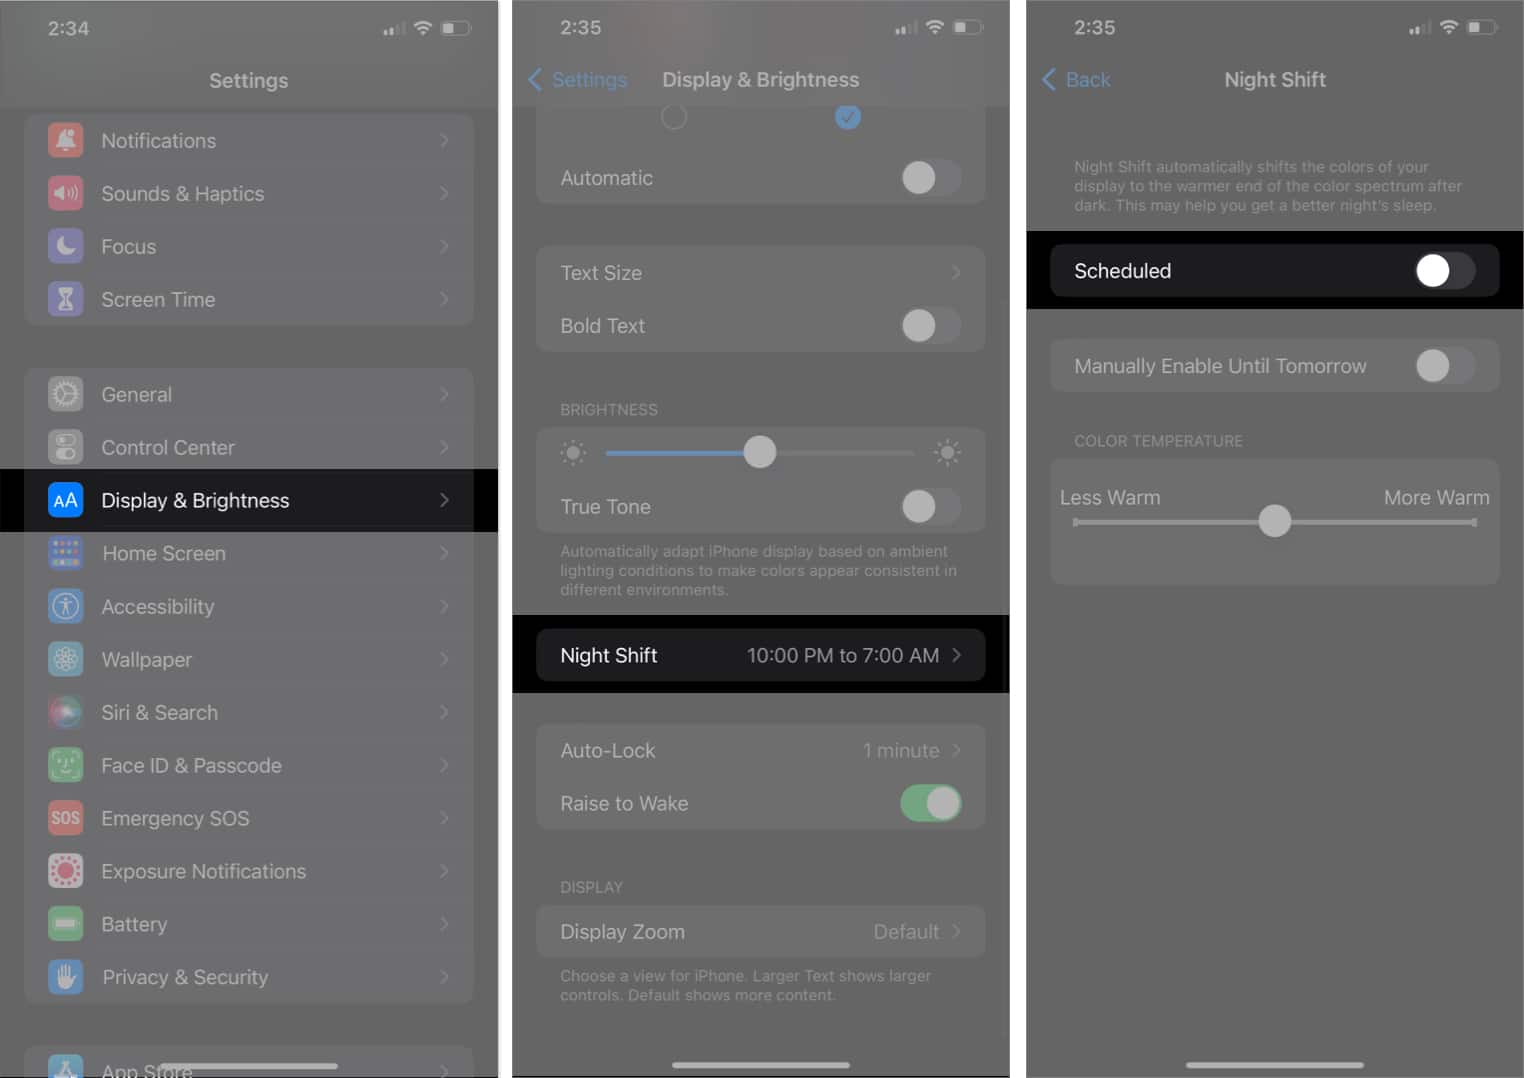 Launch the Settings app, go to Display & Brightness, tap Night Shift, and disable the button next to Scheduled.